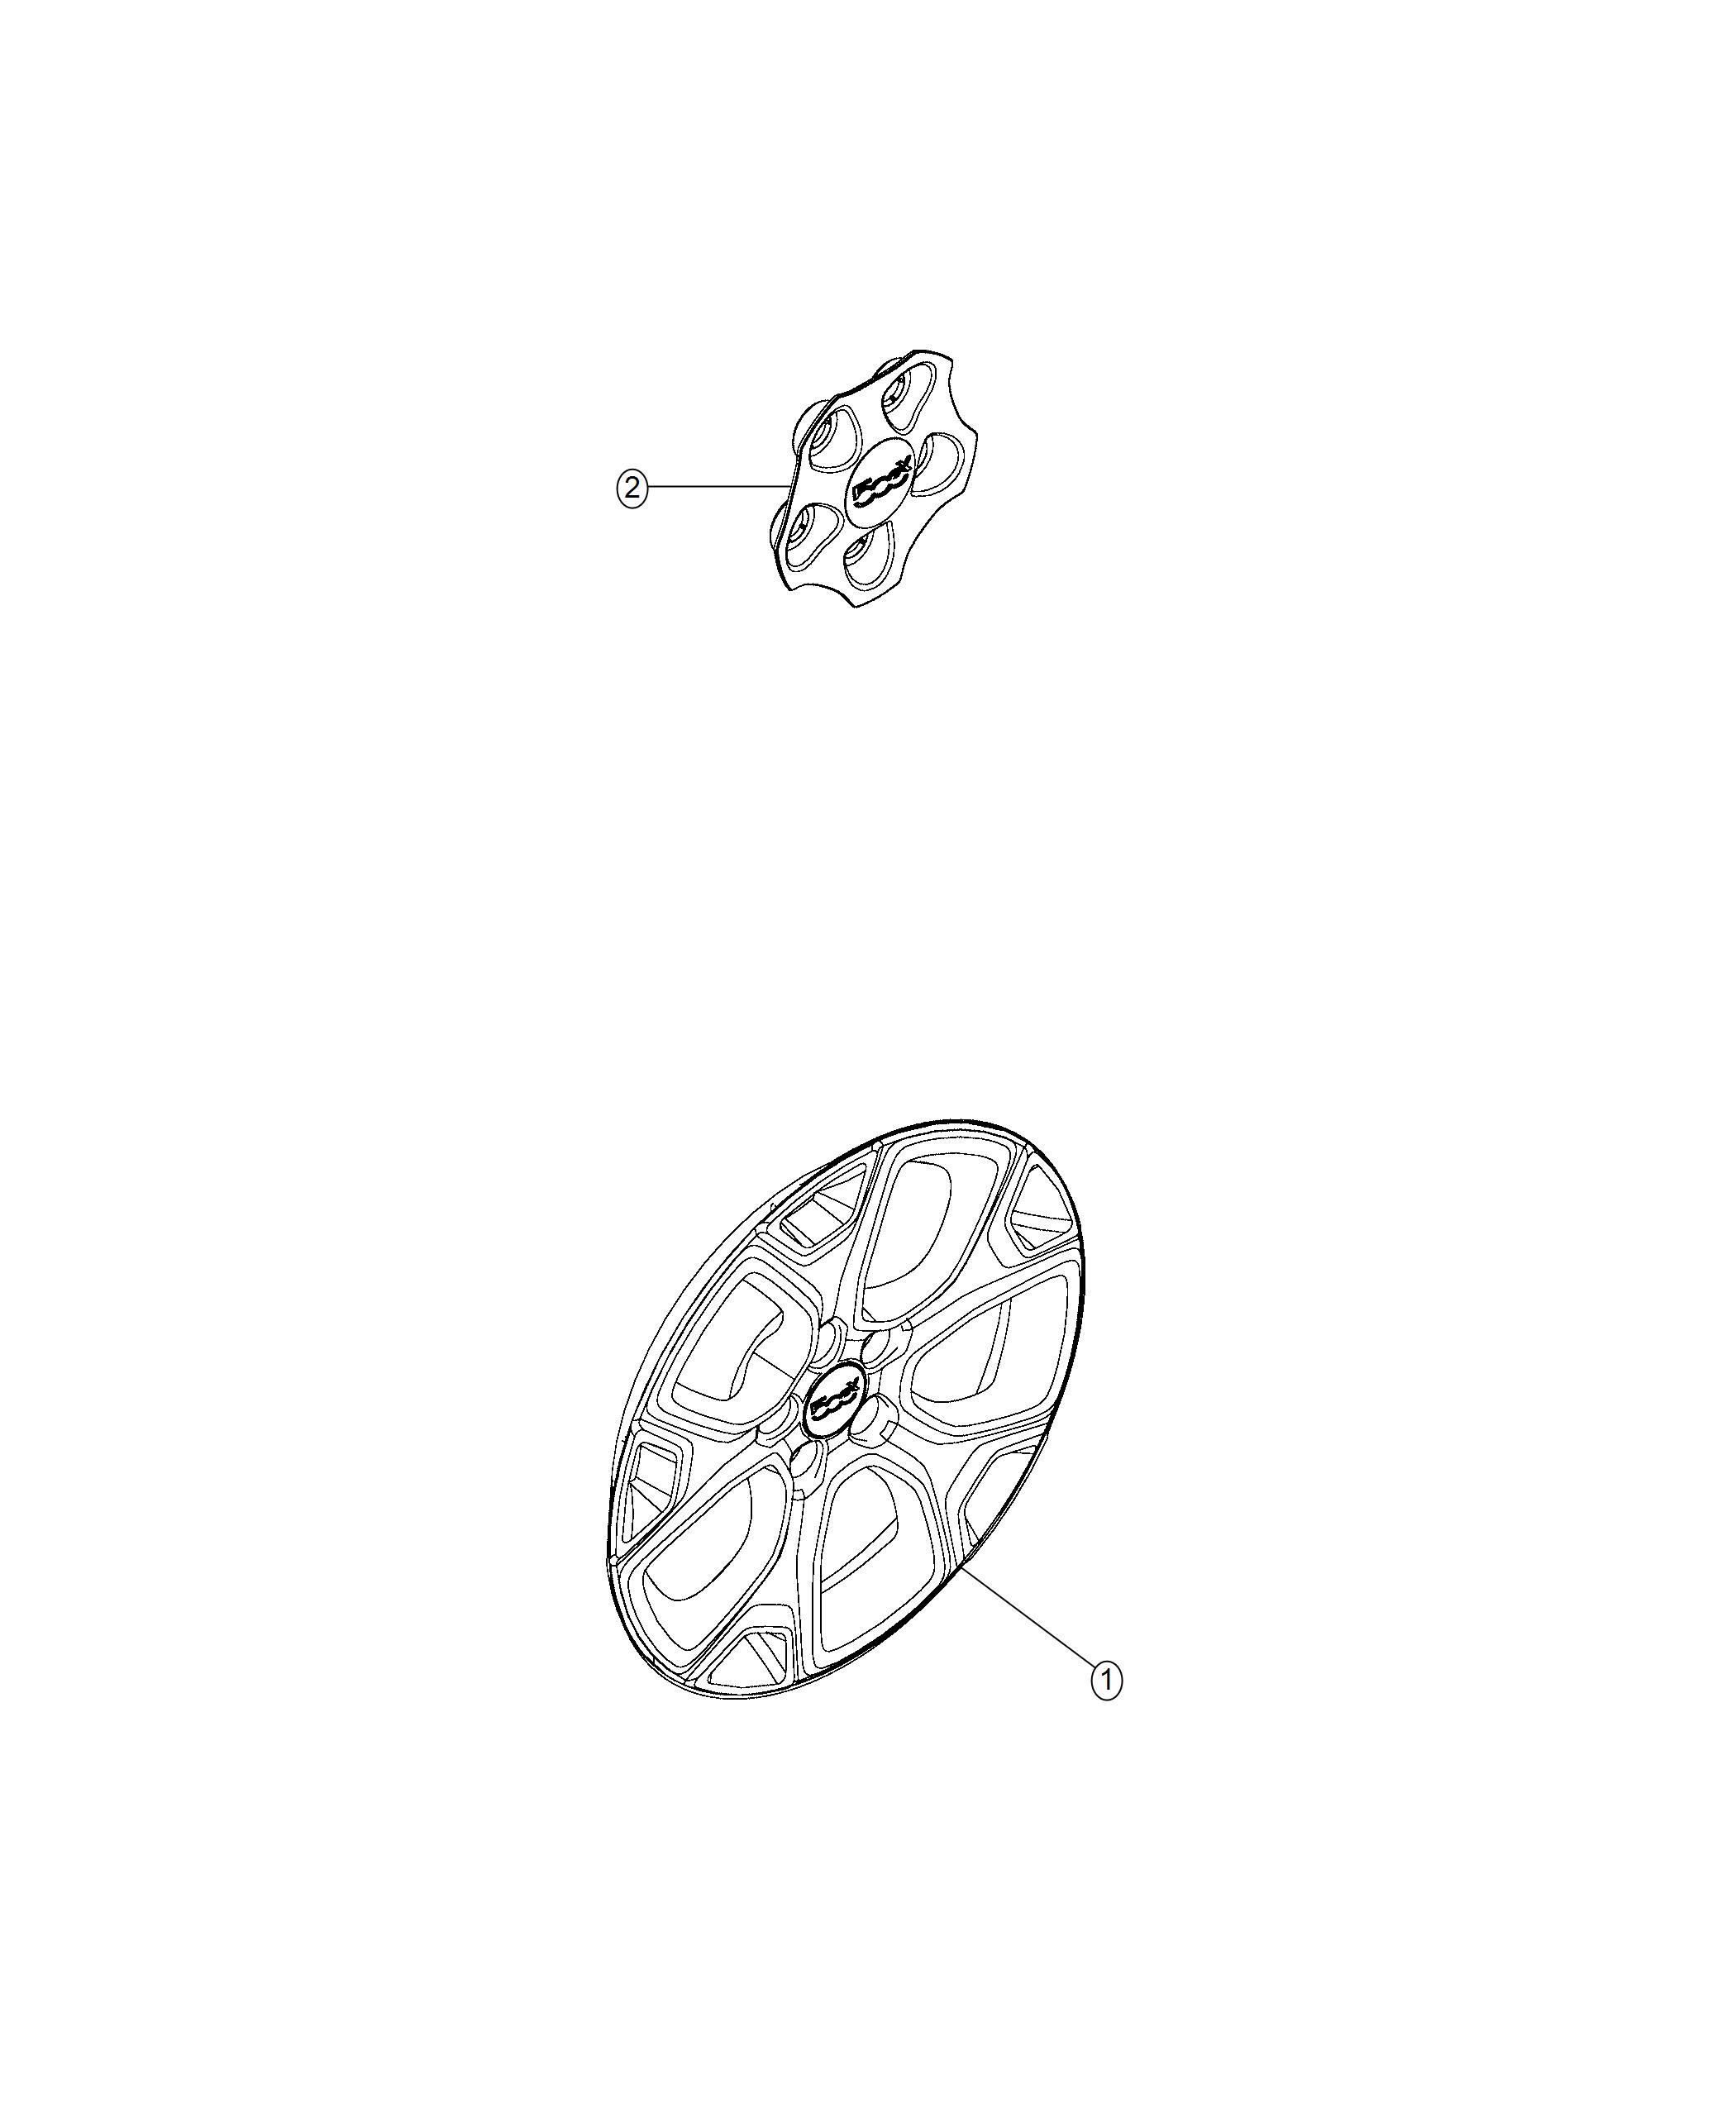 Wheel Covers and Center Caps. Diagram